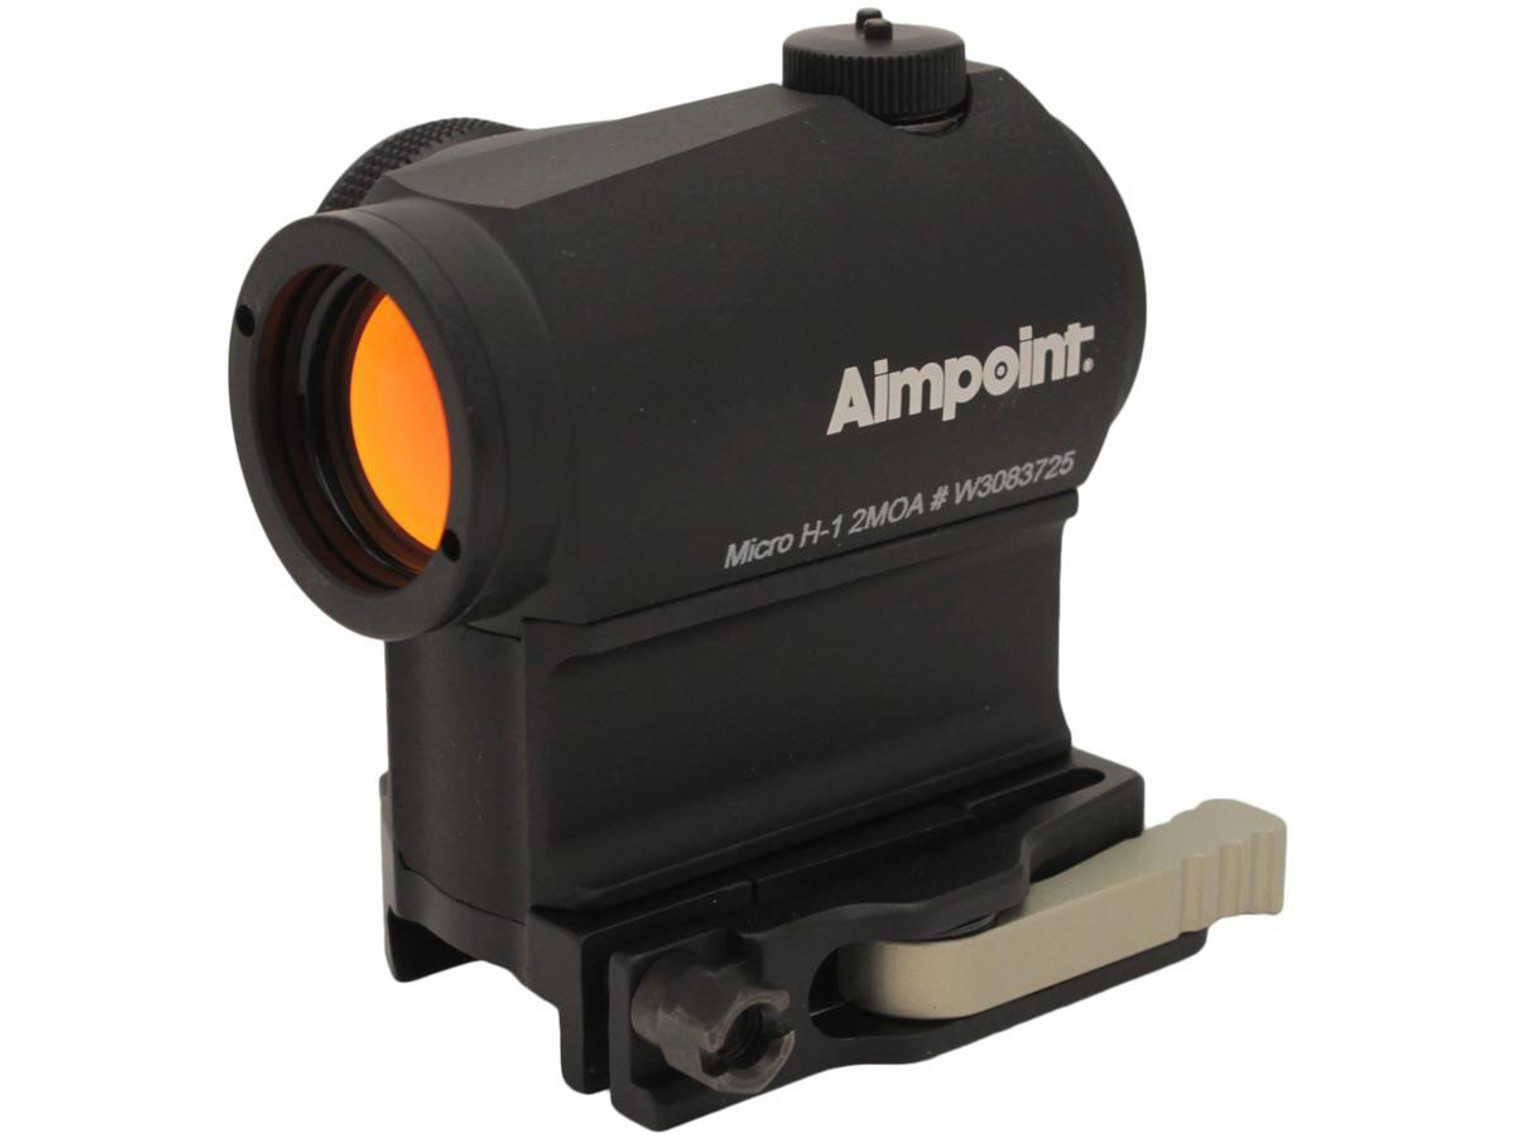 Aimpoint Micro H-1 2 MOA Red Dot Sight w/ AR15 Ready 39mm LRP Mount